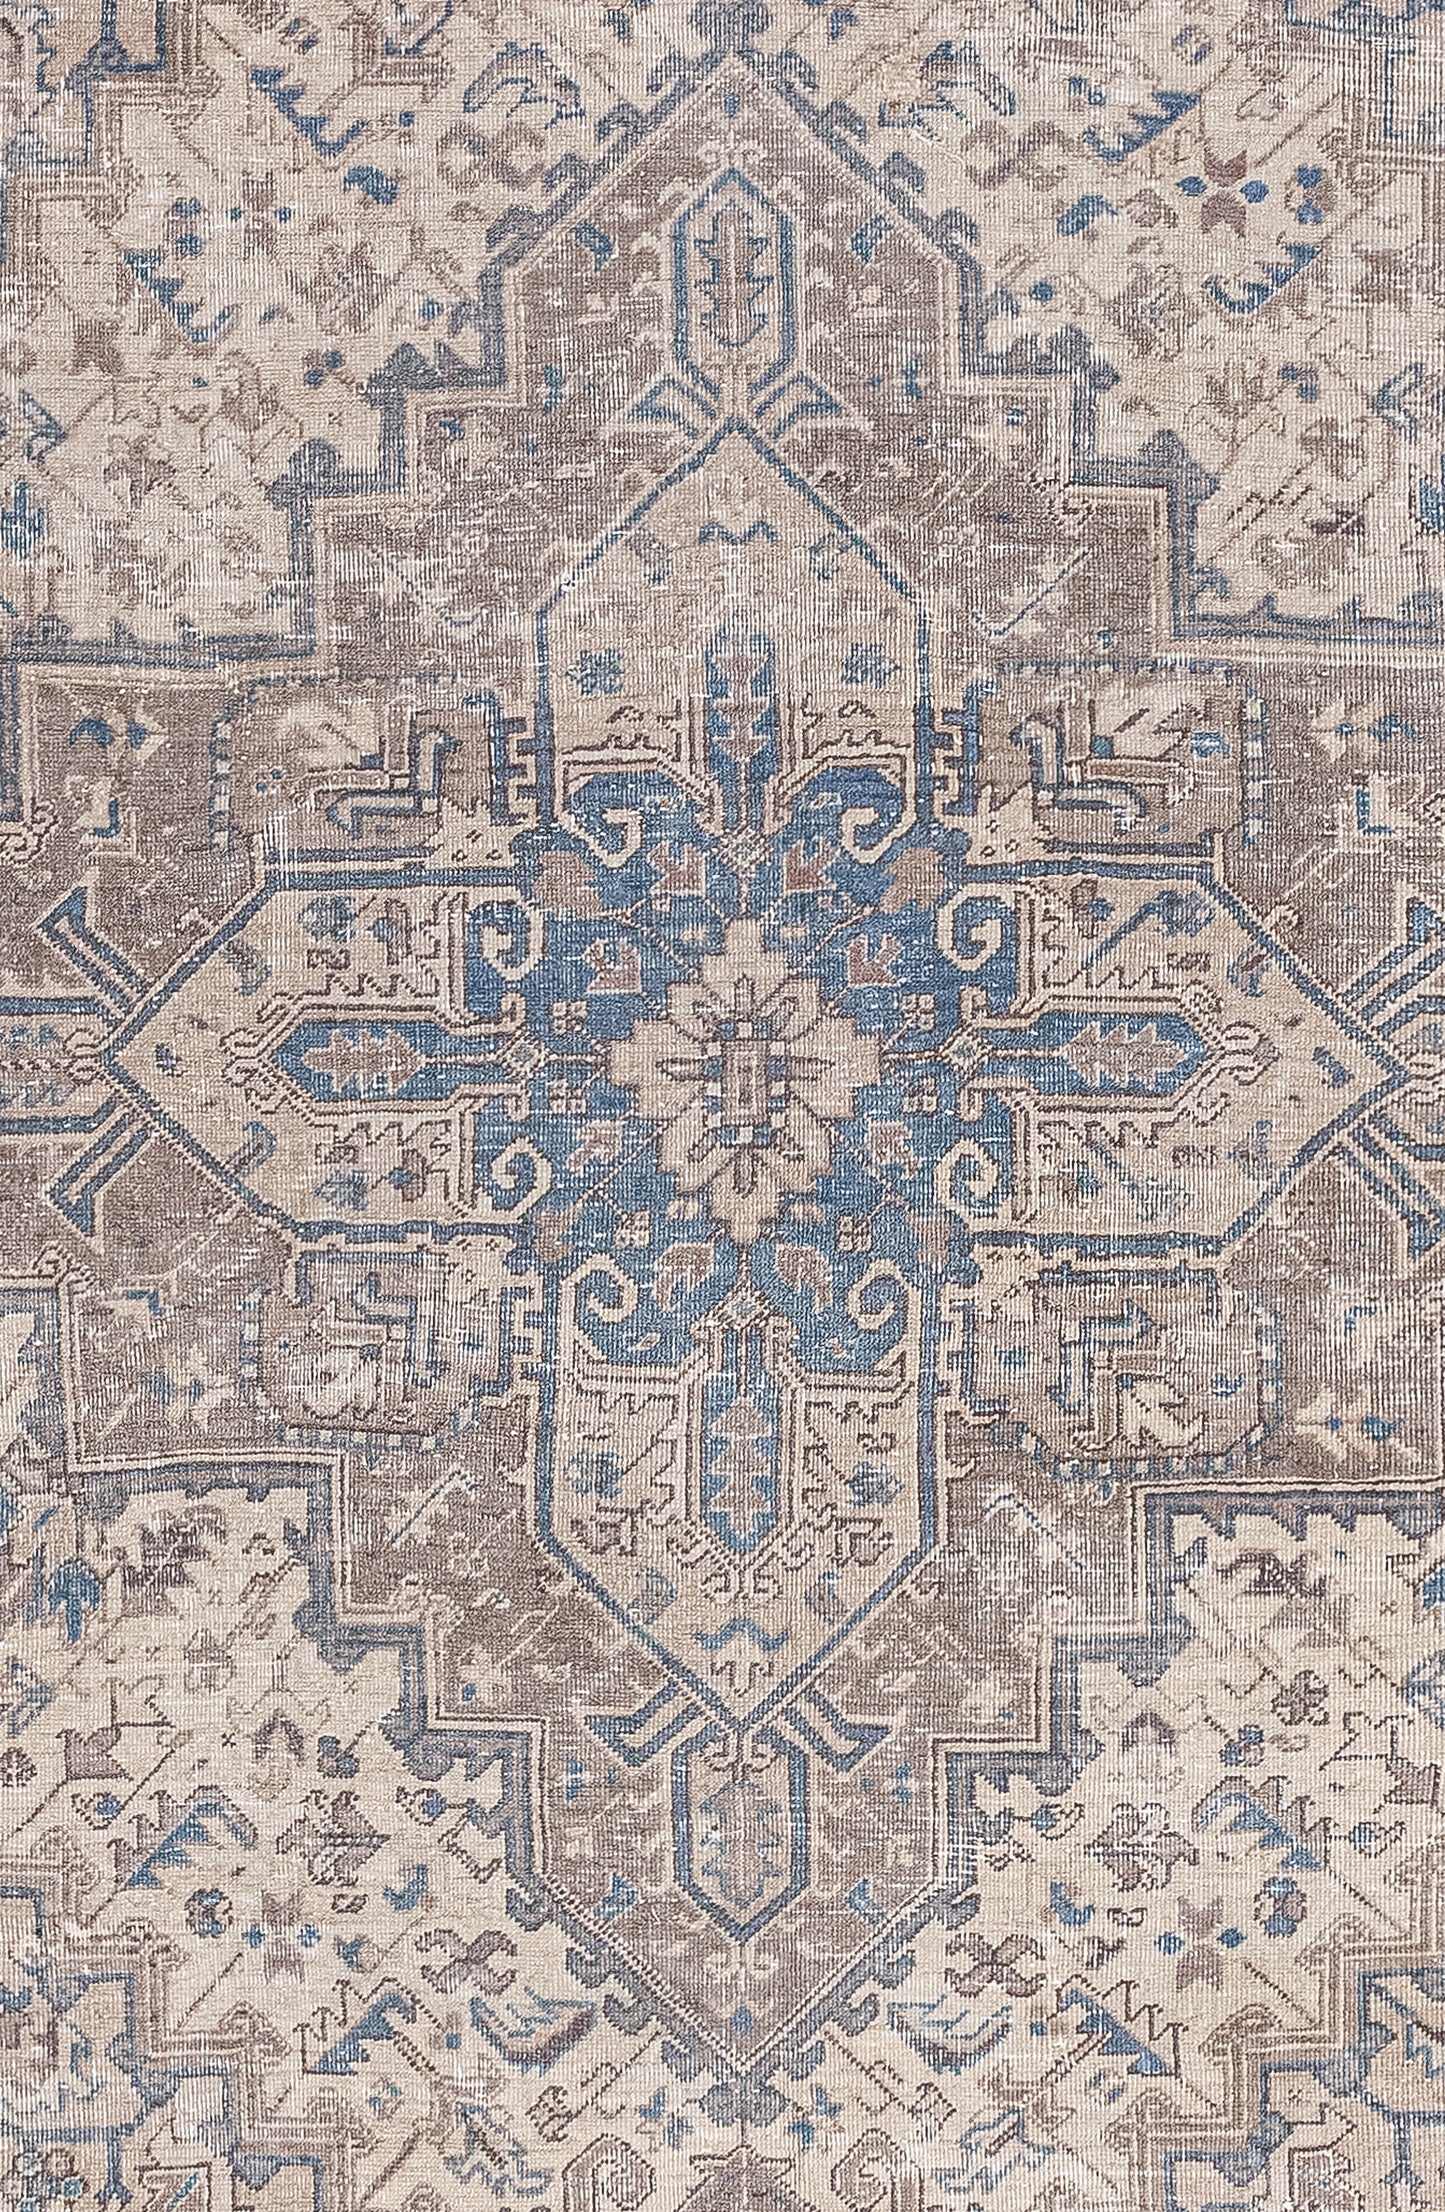  The center of the rug has a square cross that has nested others that have been filled with geometric shapes and symbols.